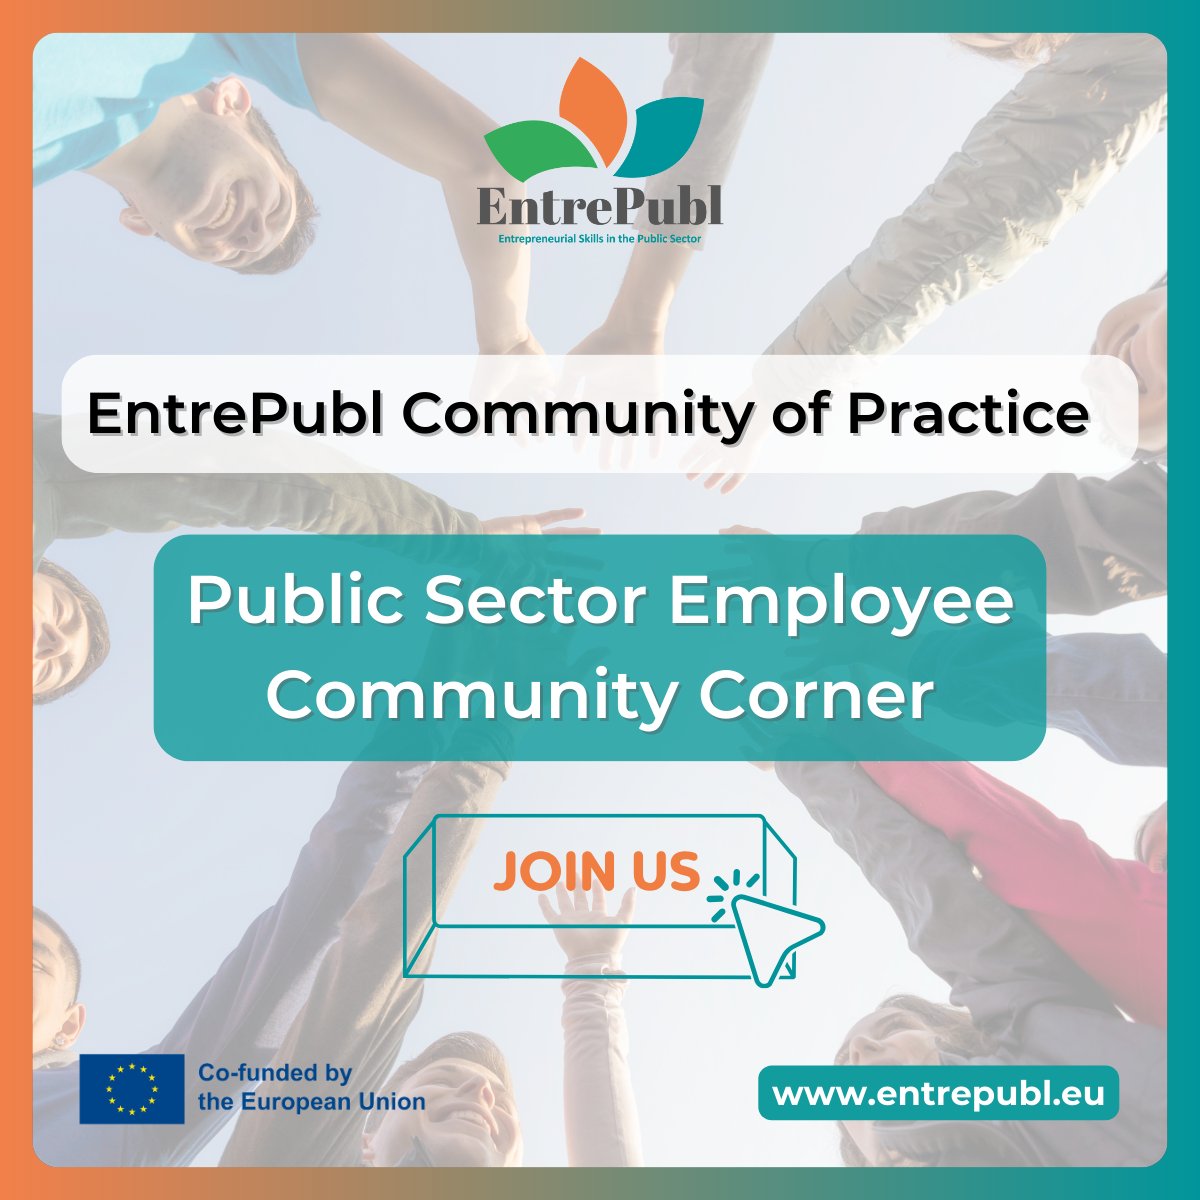 You can now join the @EntrePubl Community of Practice LinkedIn Group: 'Public Sector Employee Community Corner'. 🚀This is the place where you can share your expertise and inspire your colleagues! 🤝 bit.ly/EntrePublCoP 🔎More information👉entrepubl.eu